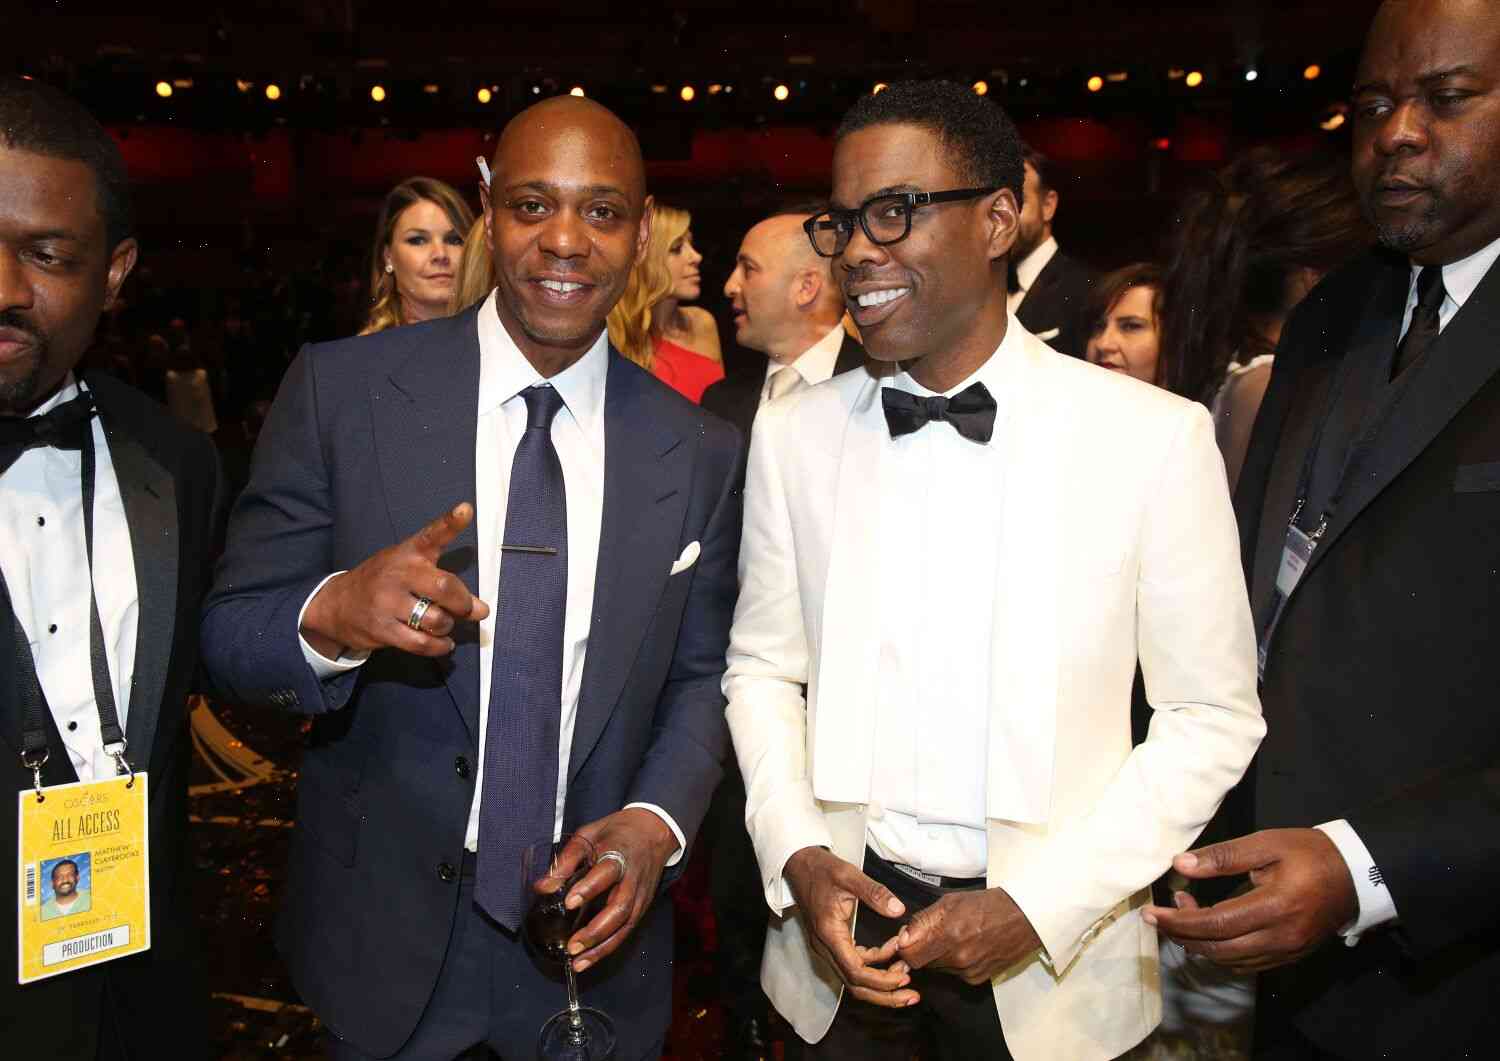 Chris Rock and Dave Chappelle Are Heading to the Comedy Store in Santa Monica